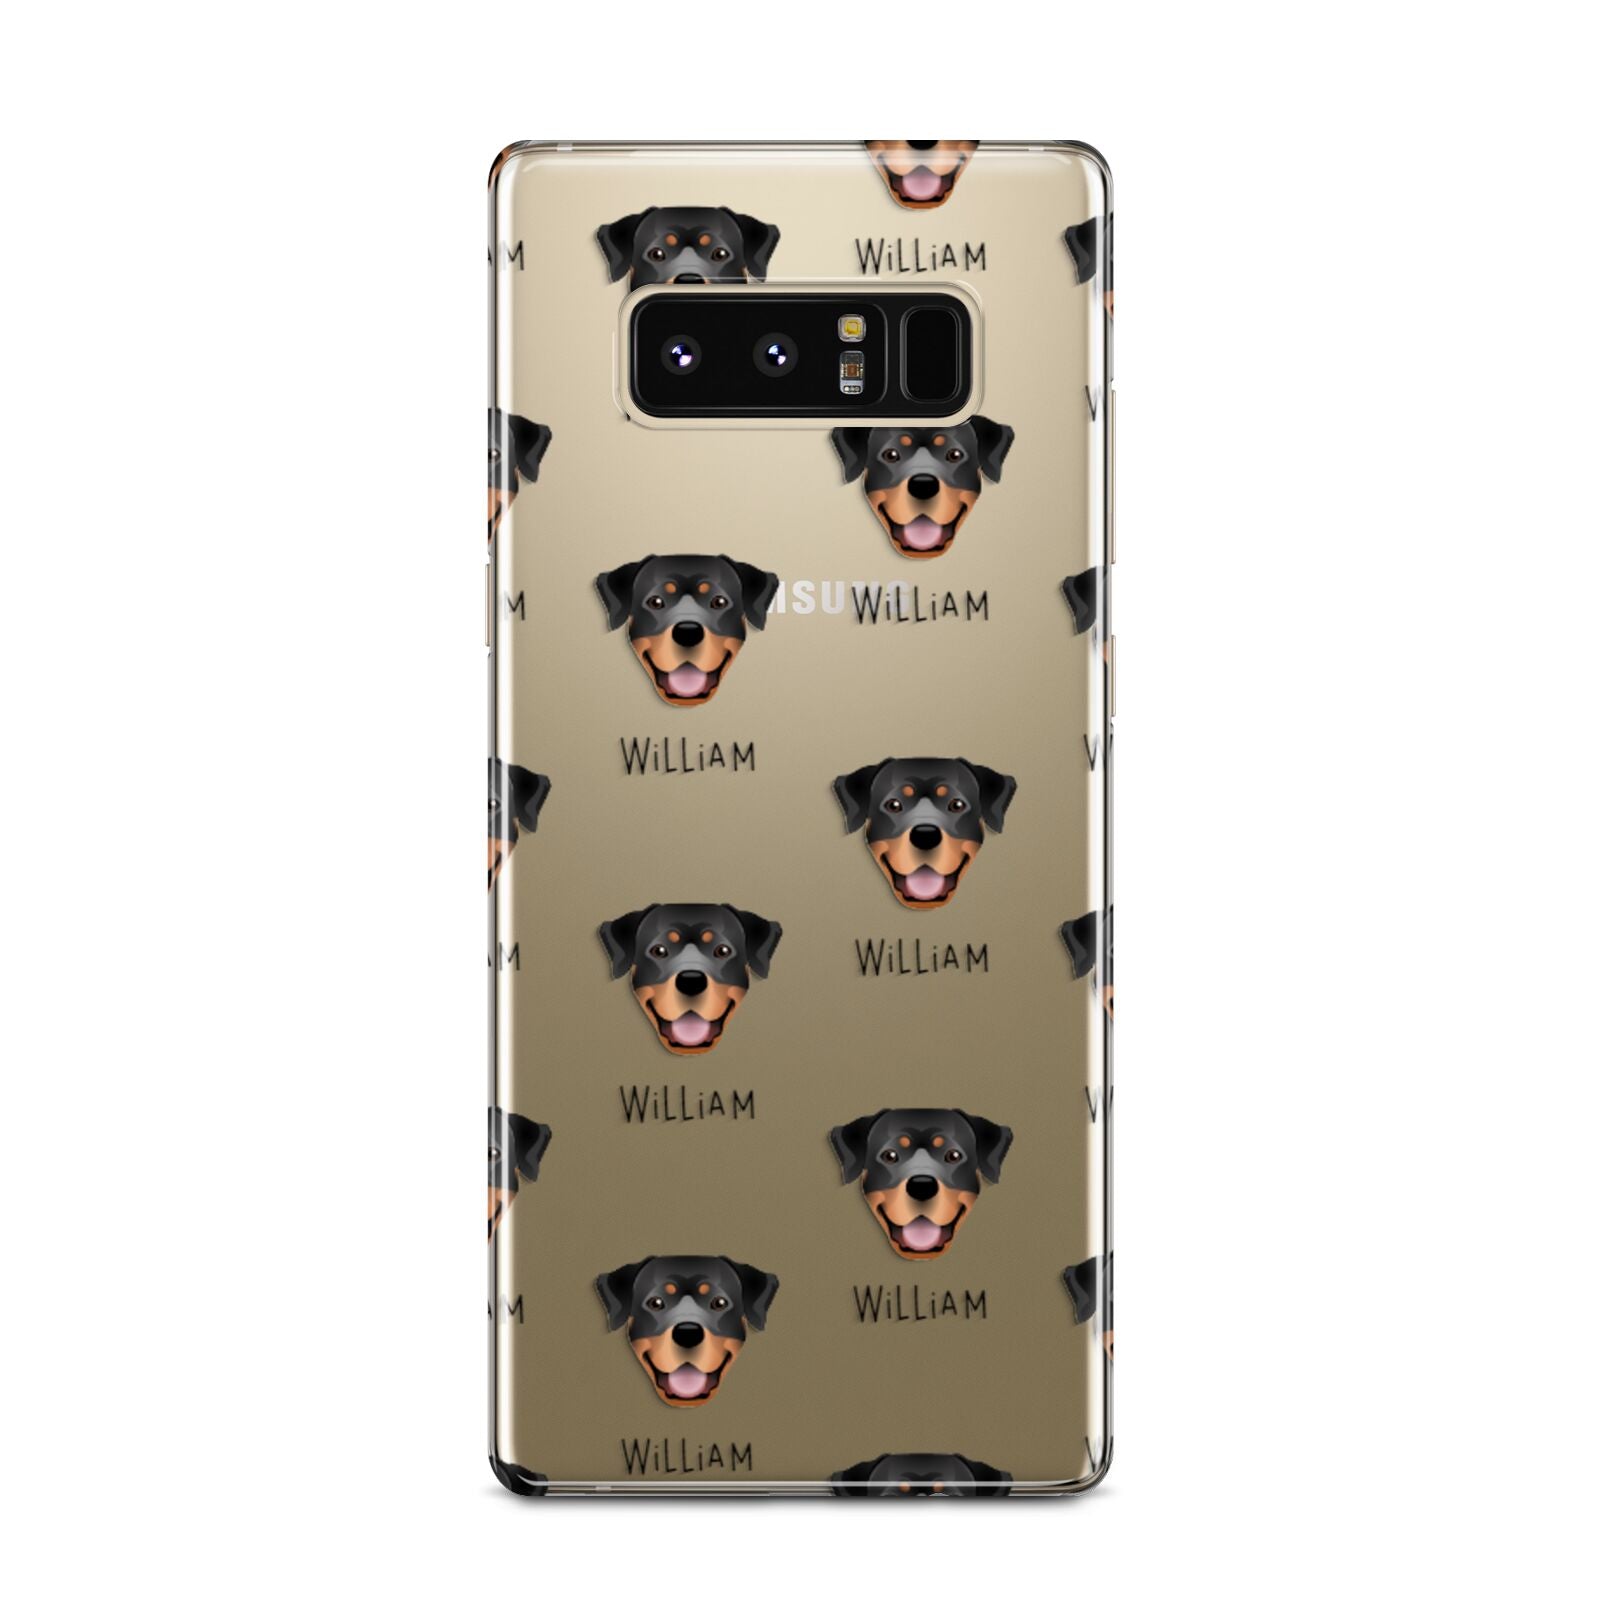 Rottweiler Icon with Name Samsung Galaxy Note 8 Case